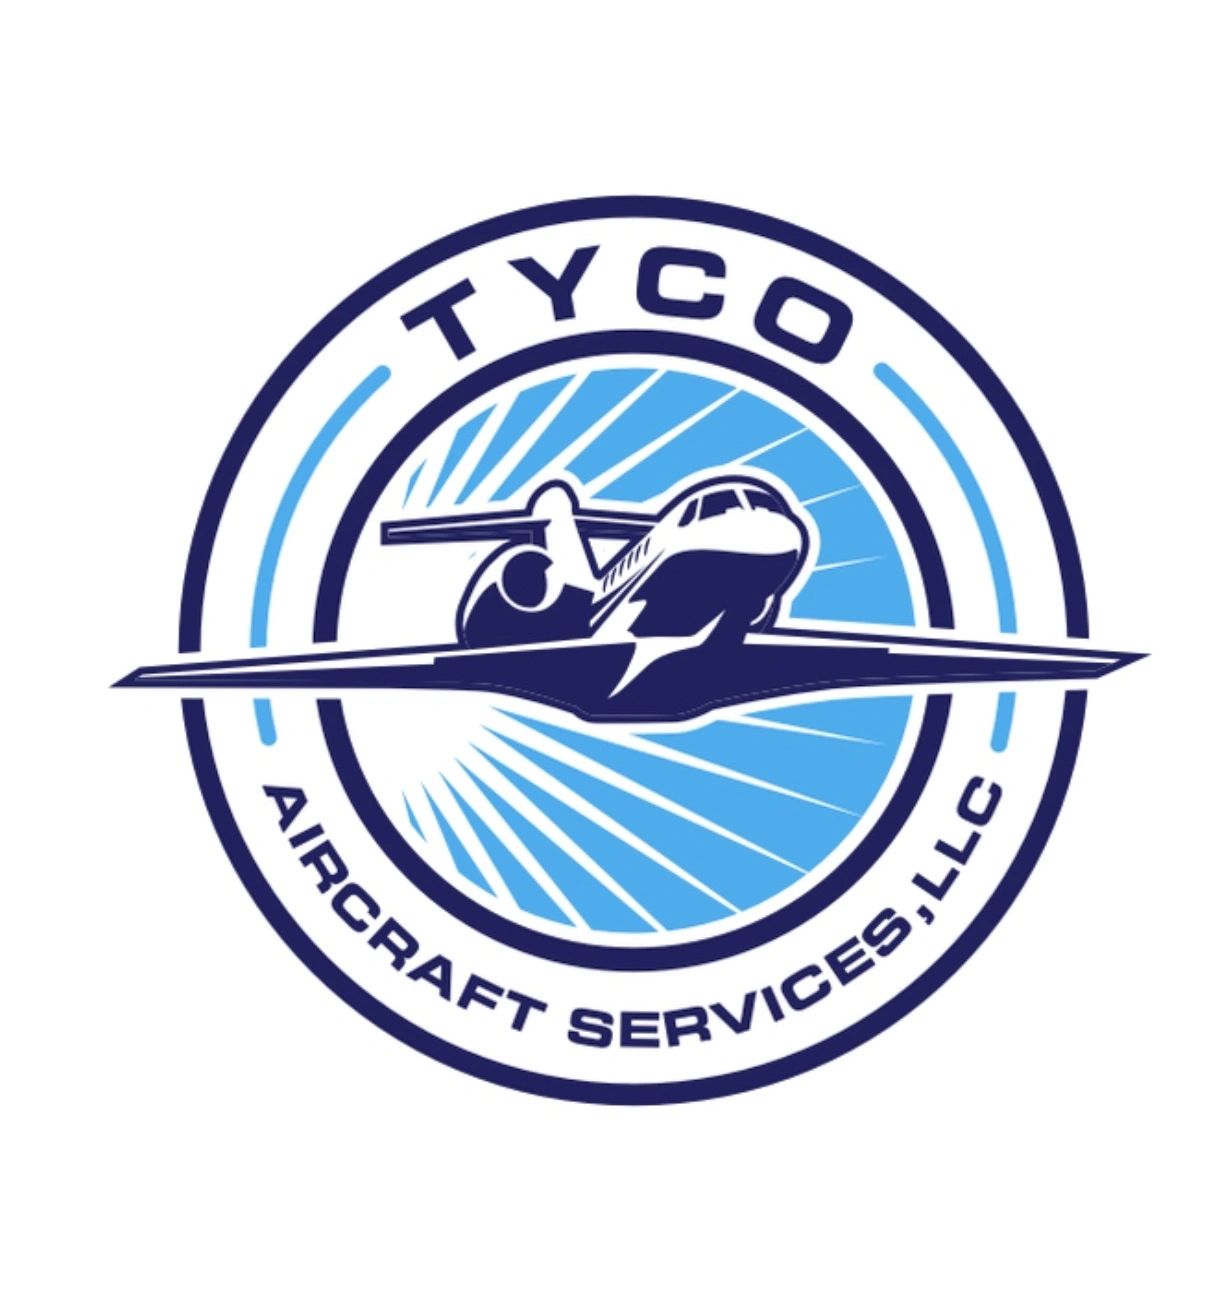 TYCO Aircraft Services